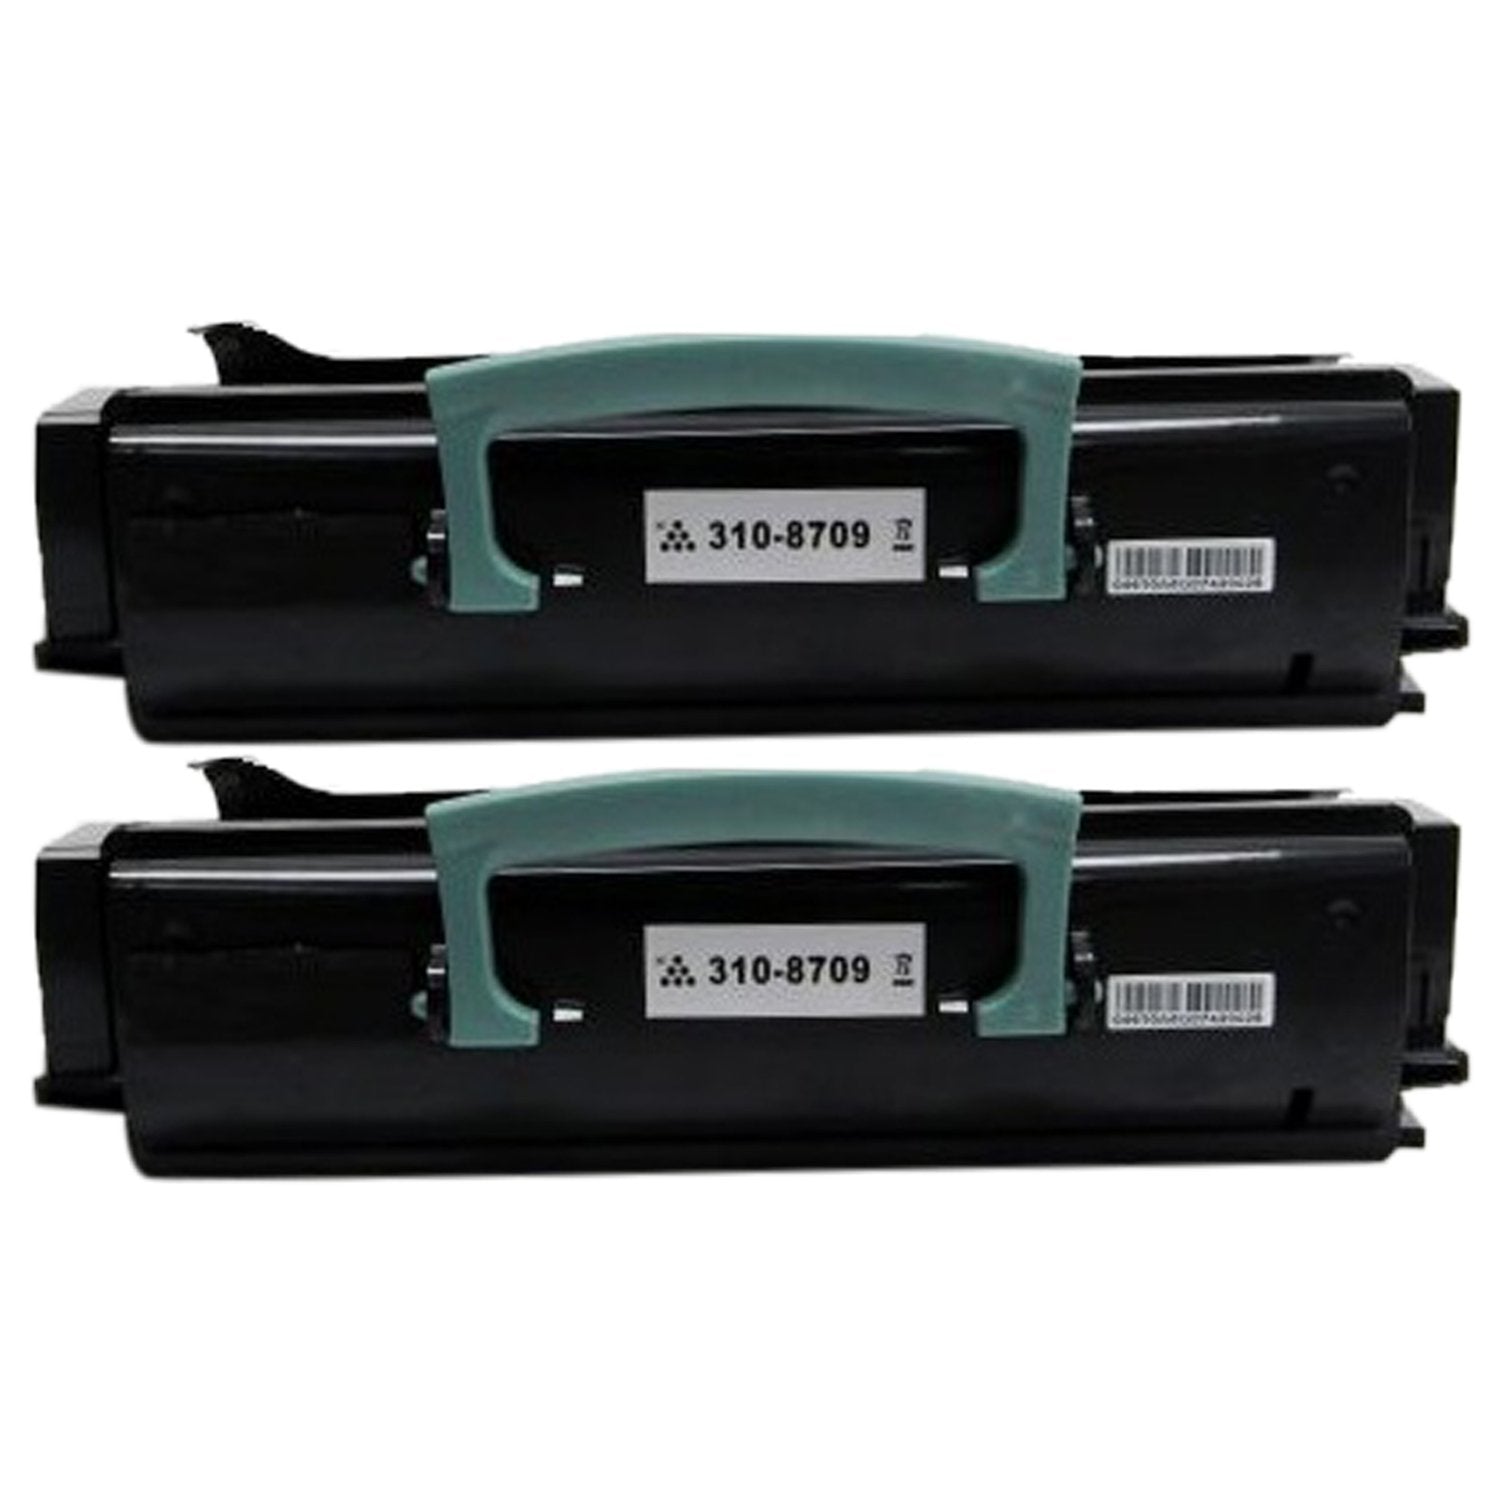 Absolute Toner Compatible Dell 310-8709 High Yield Black Toner Cartridge | Absolute Toner Dell Toner Cartridges